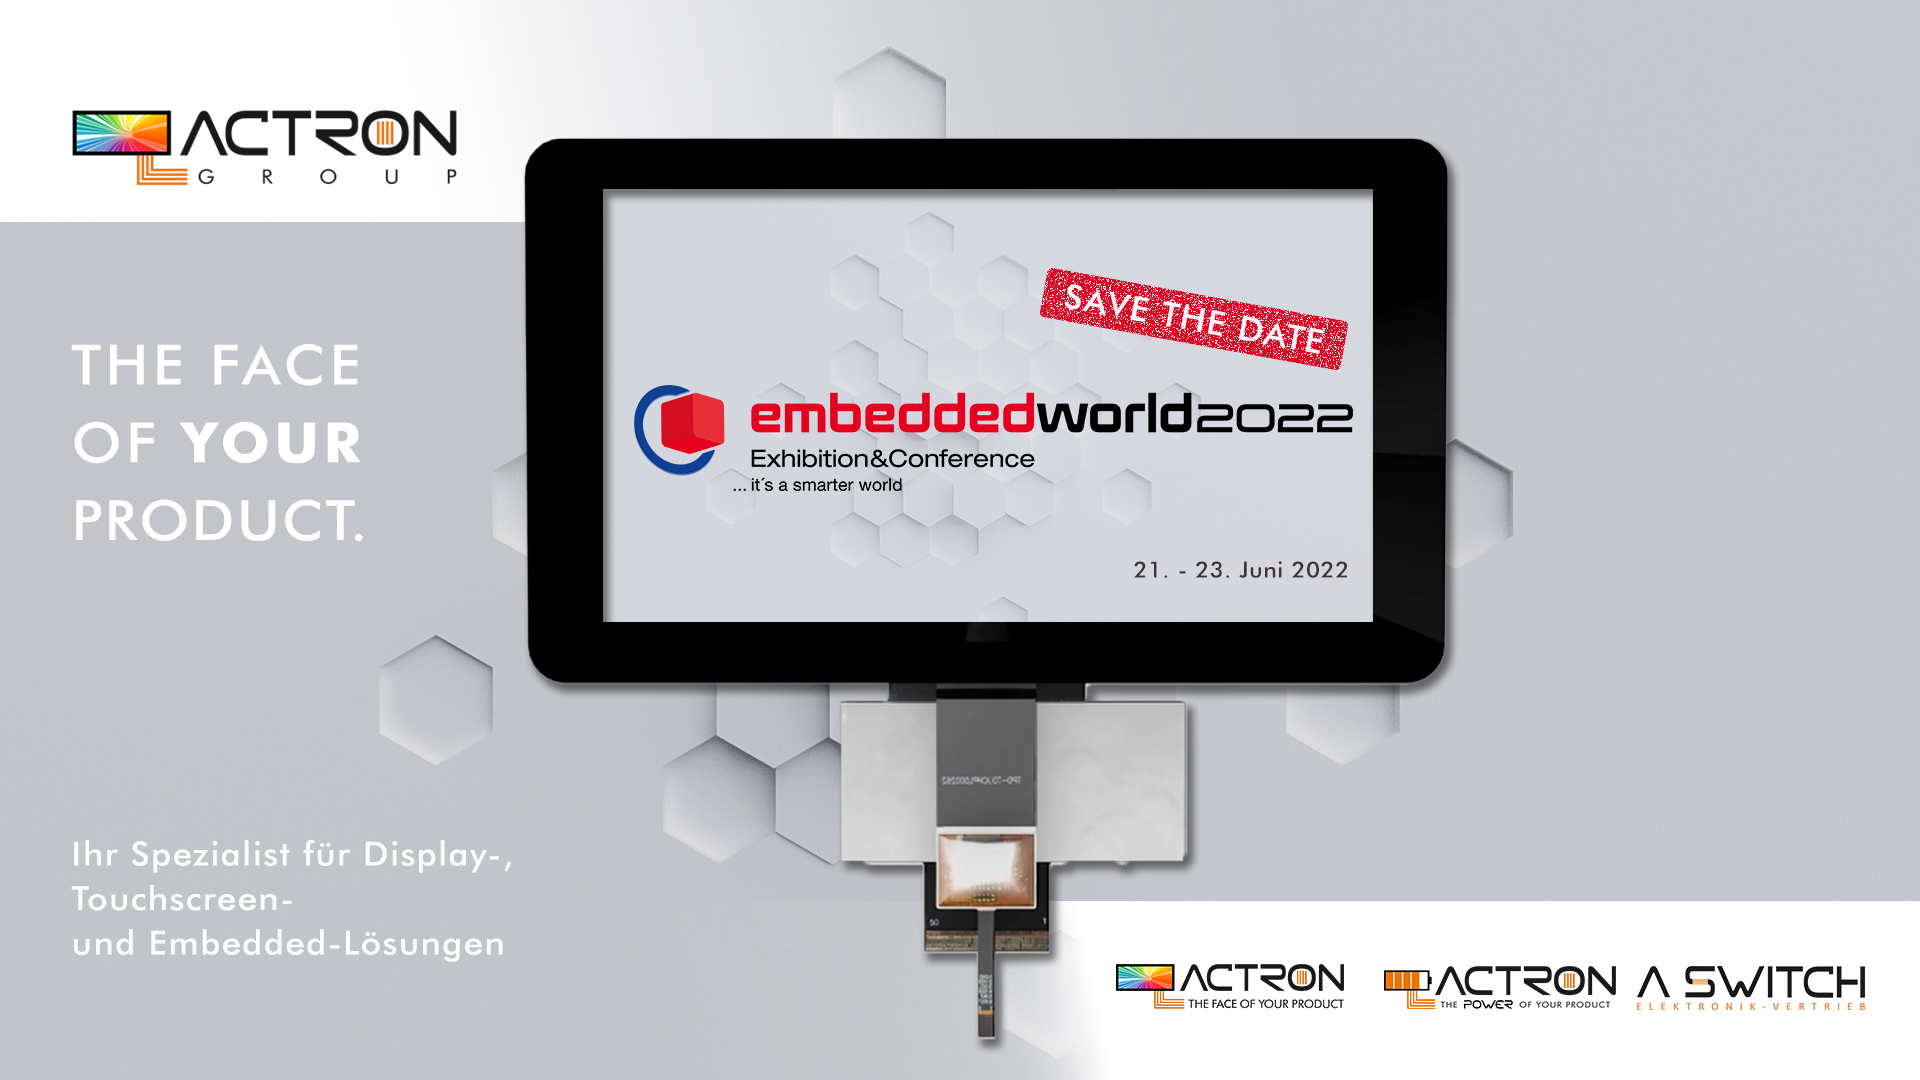 ACTRON AG goes embedded world 2022